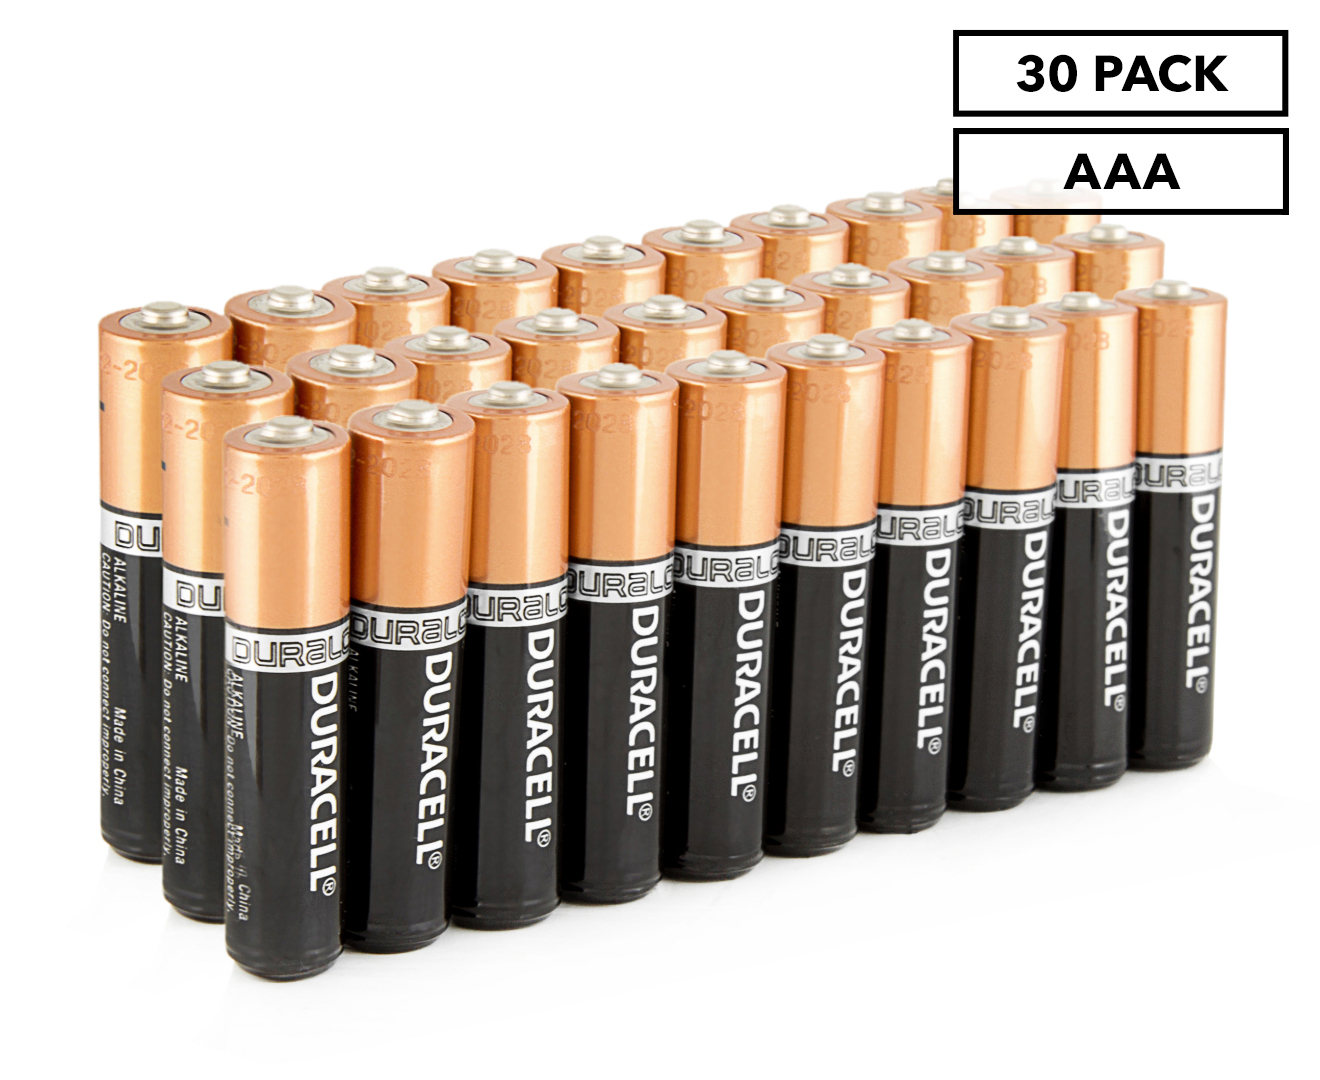 Duracell aaa batteries pack